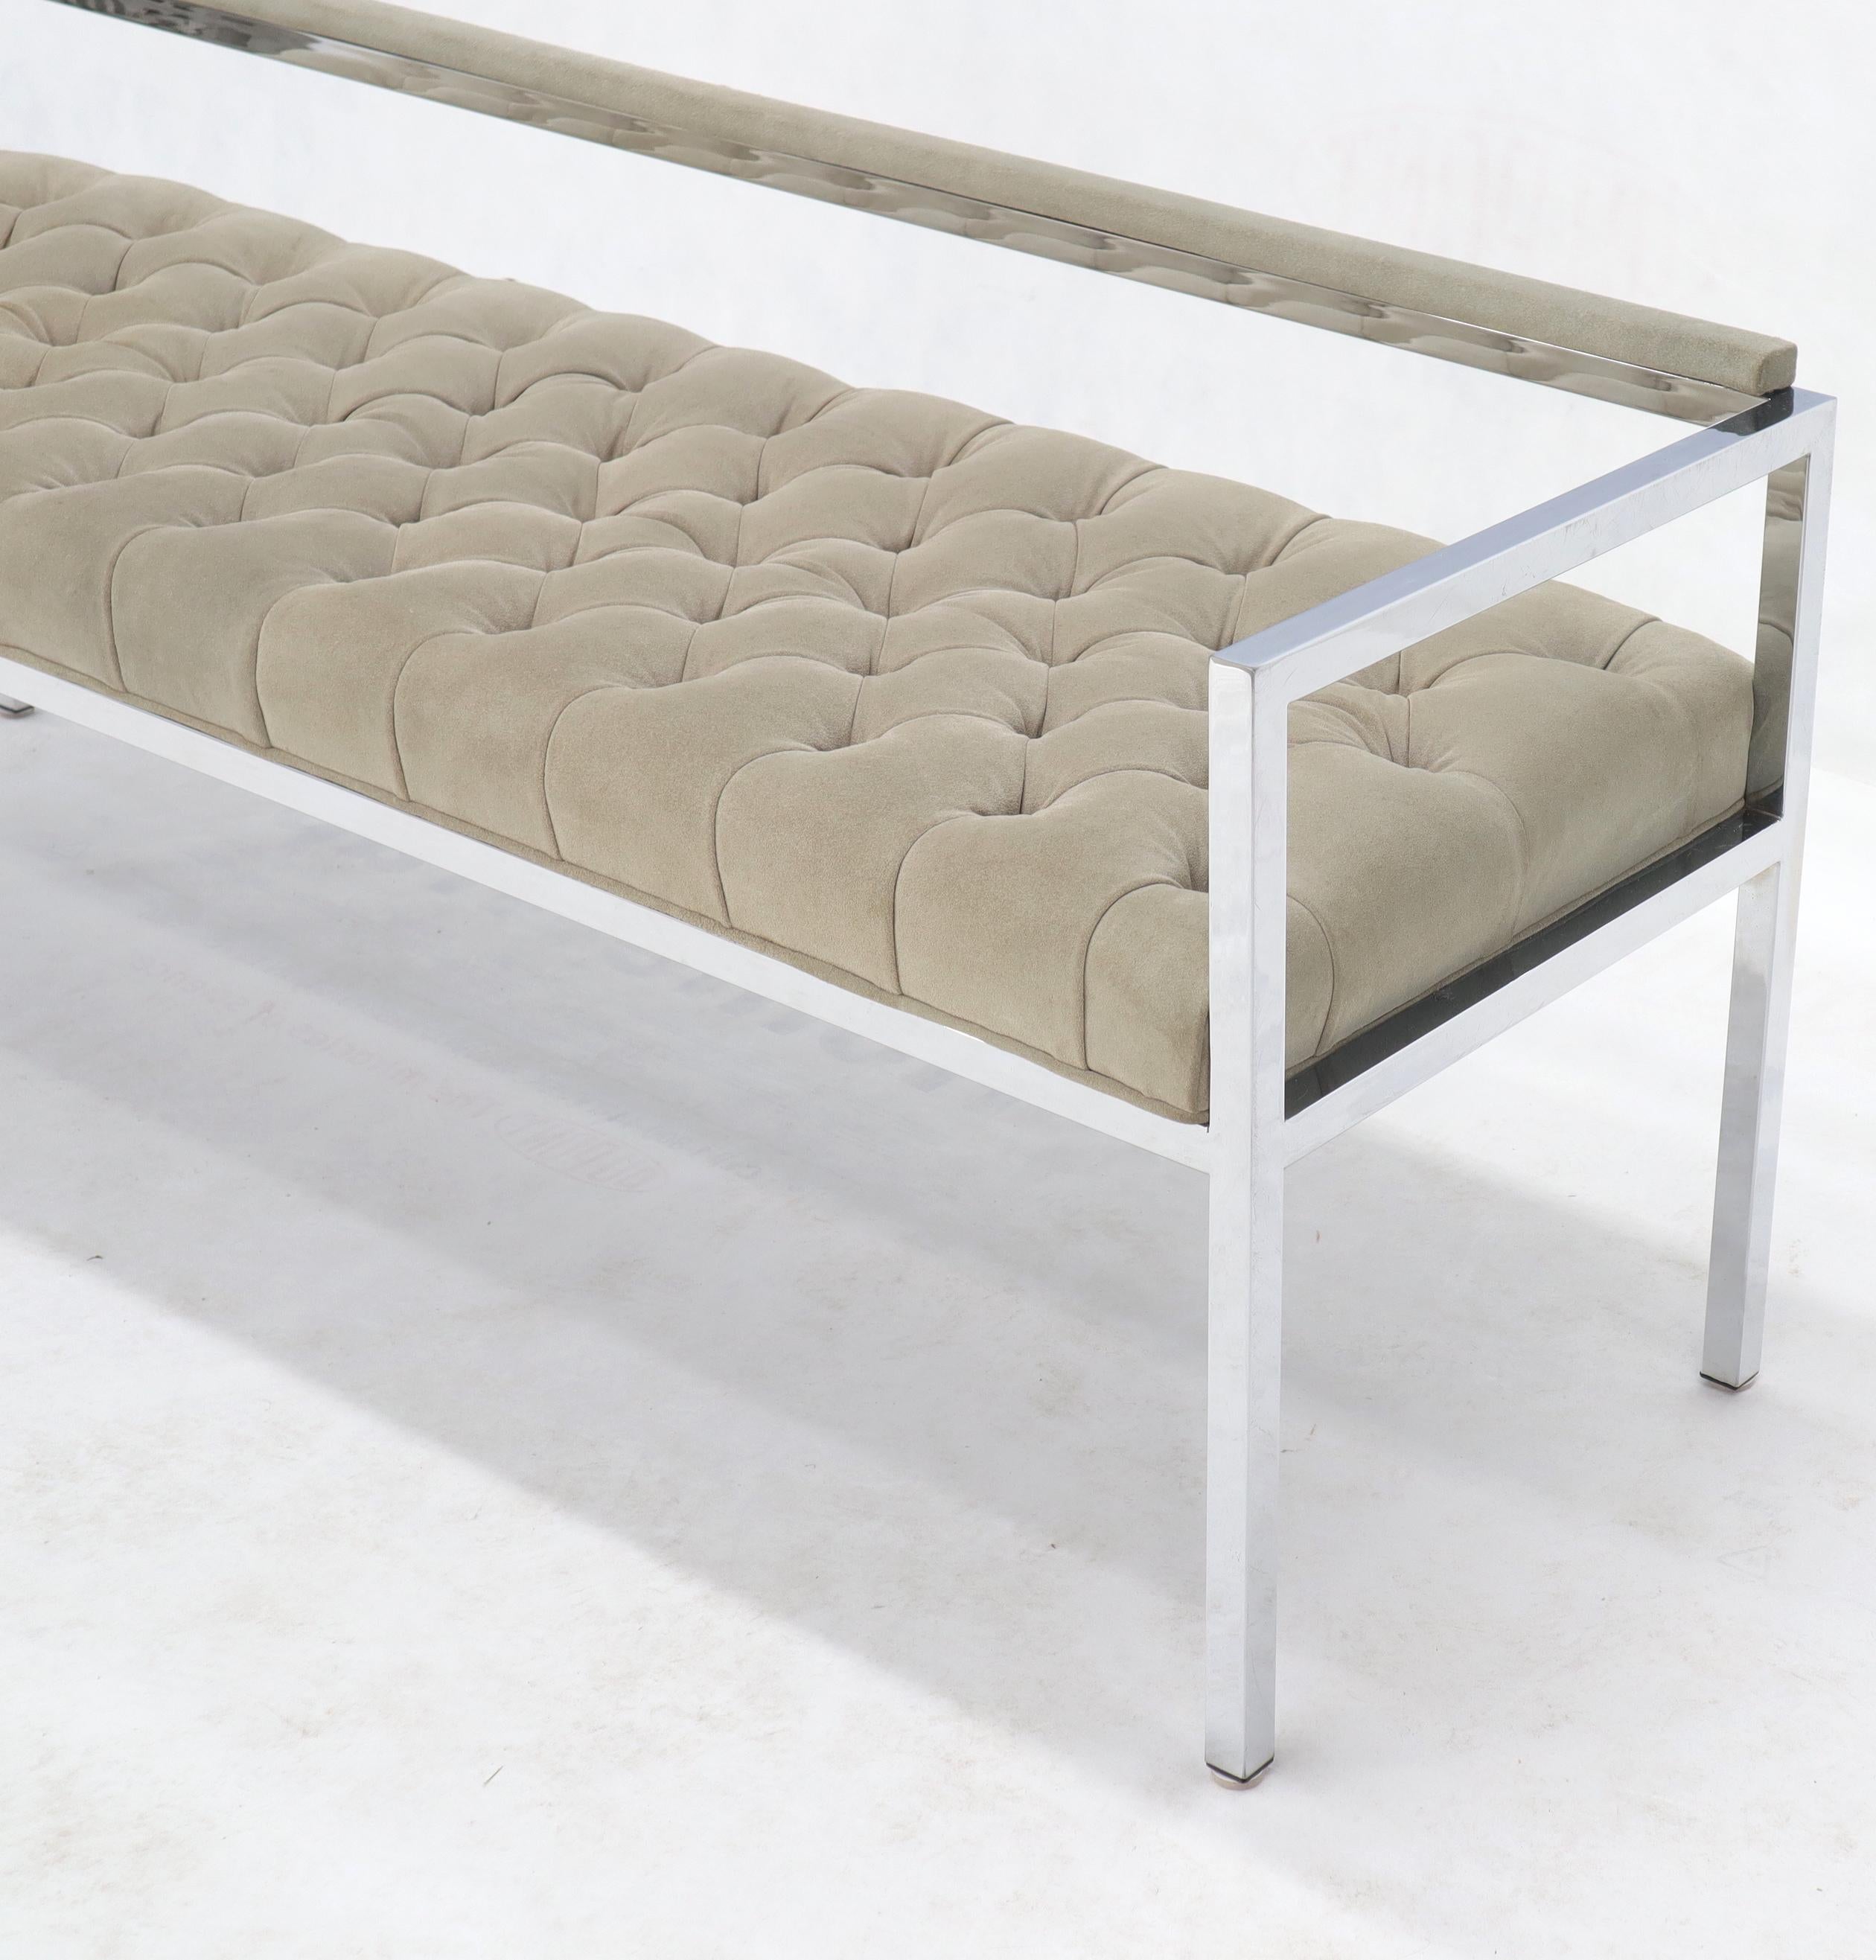 Tufted Grey Genuine Suede Leather Upholstery Chrome Bench Baughman In Excellent Condition For Sale In Rockaway, NJ